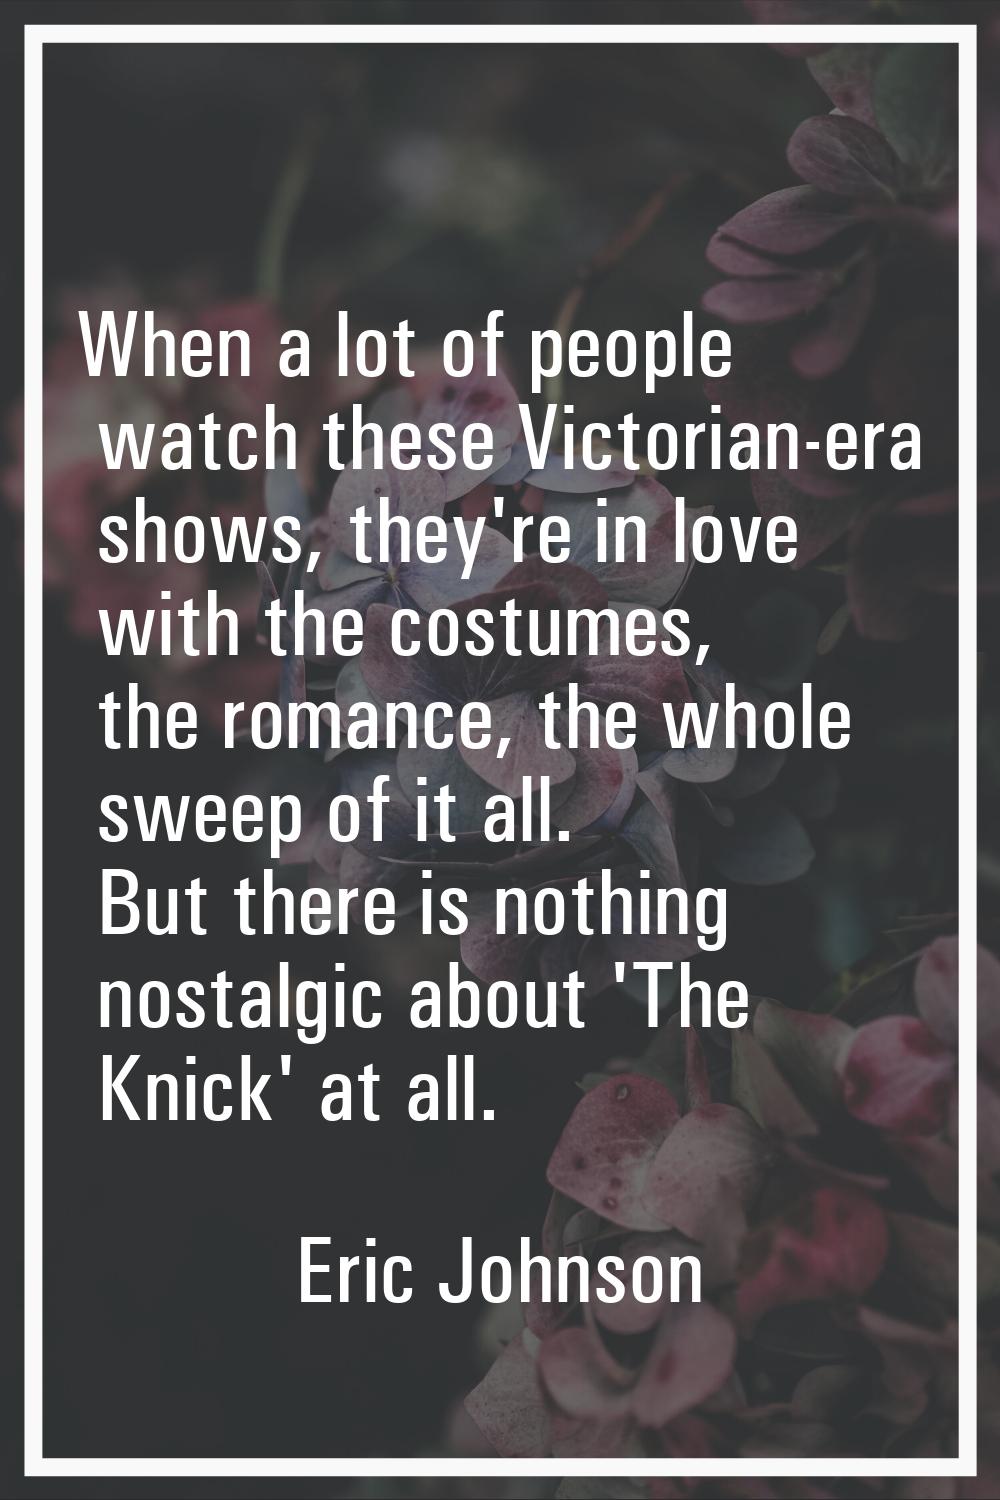 When a lot of people watch these Victorian-era shows, they're in love with the costumes, the romanc